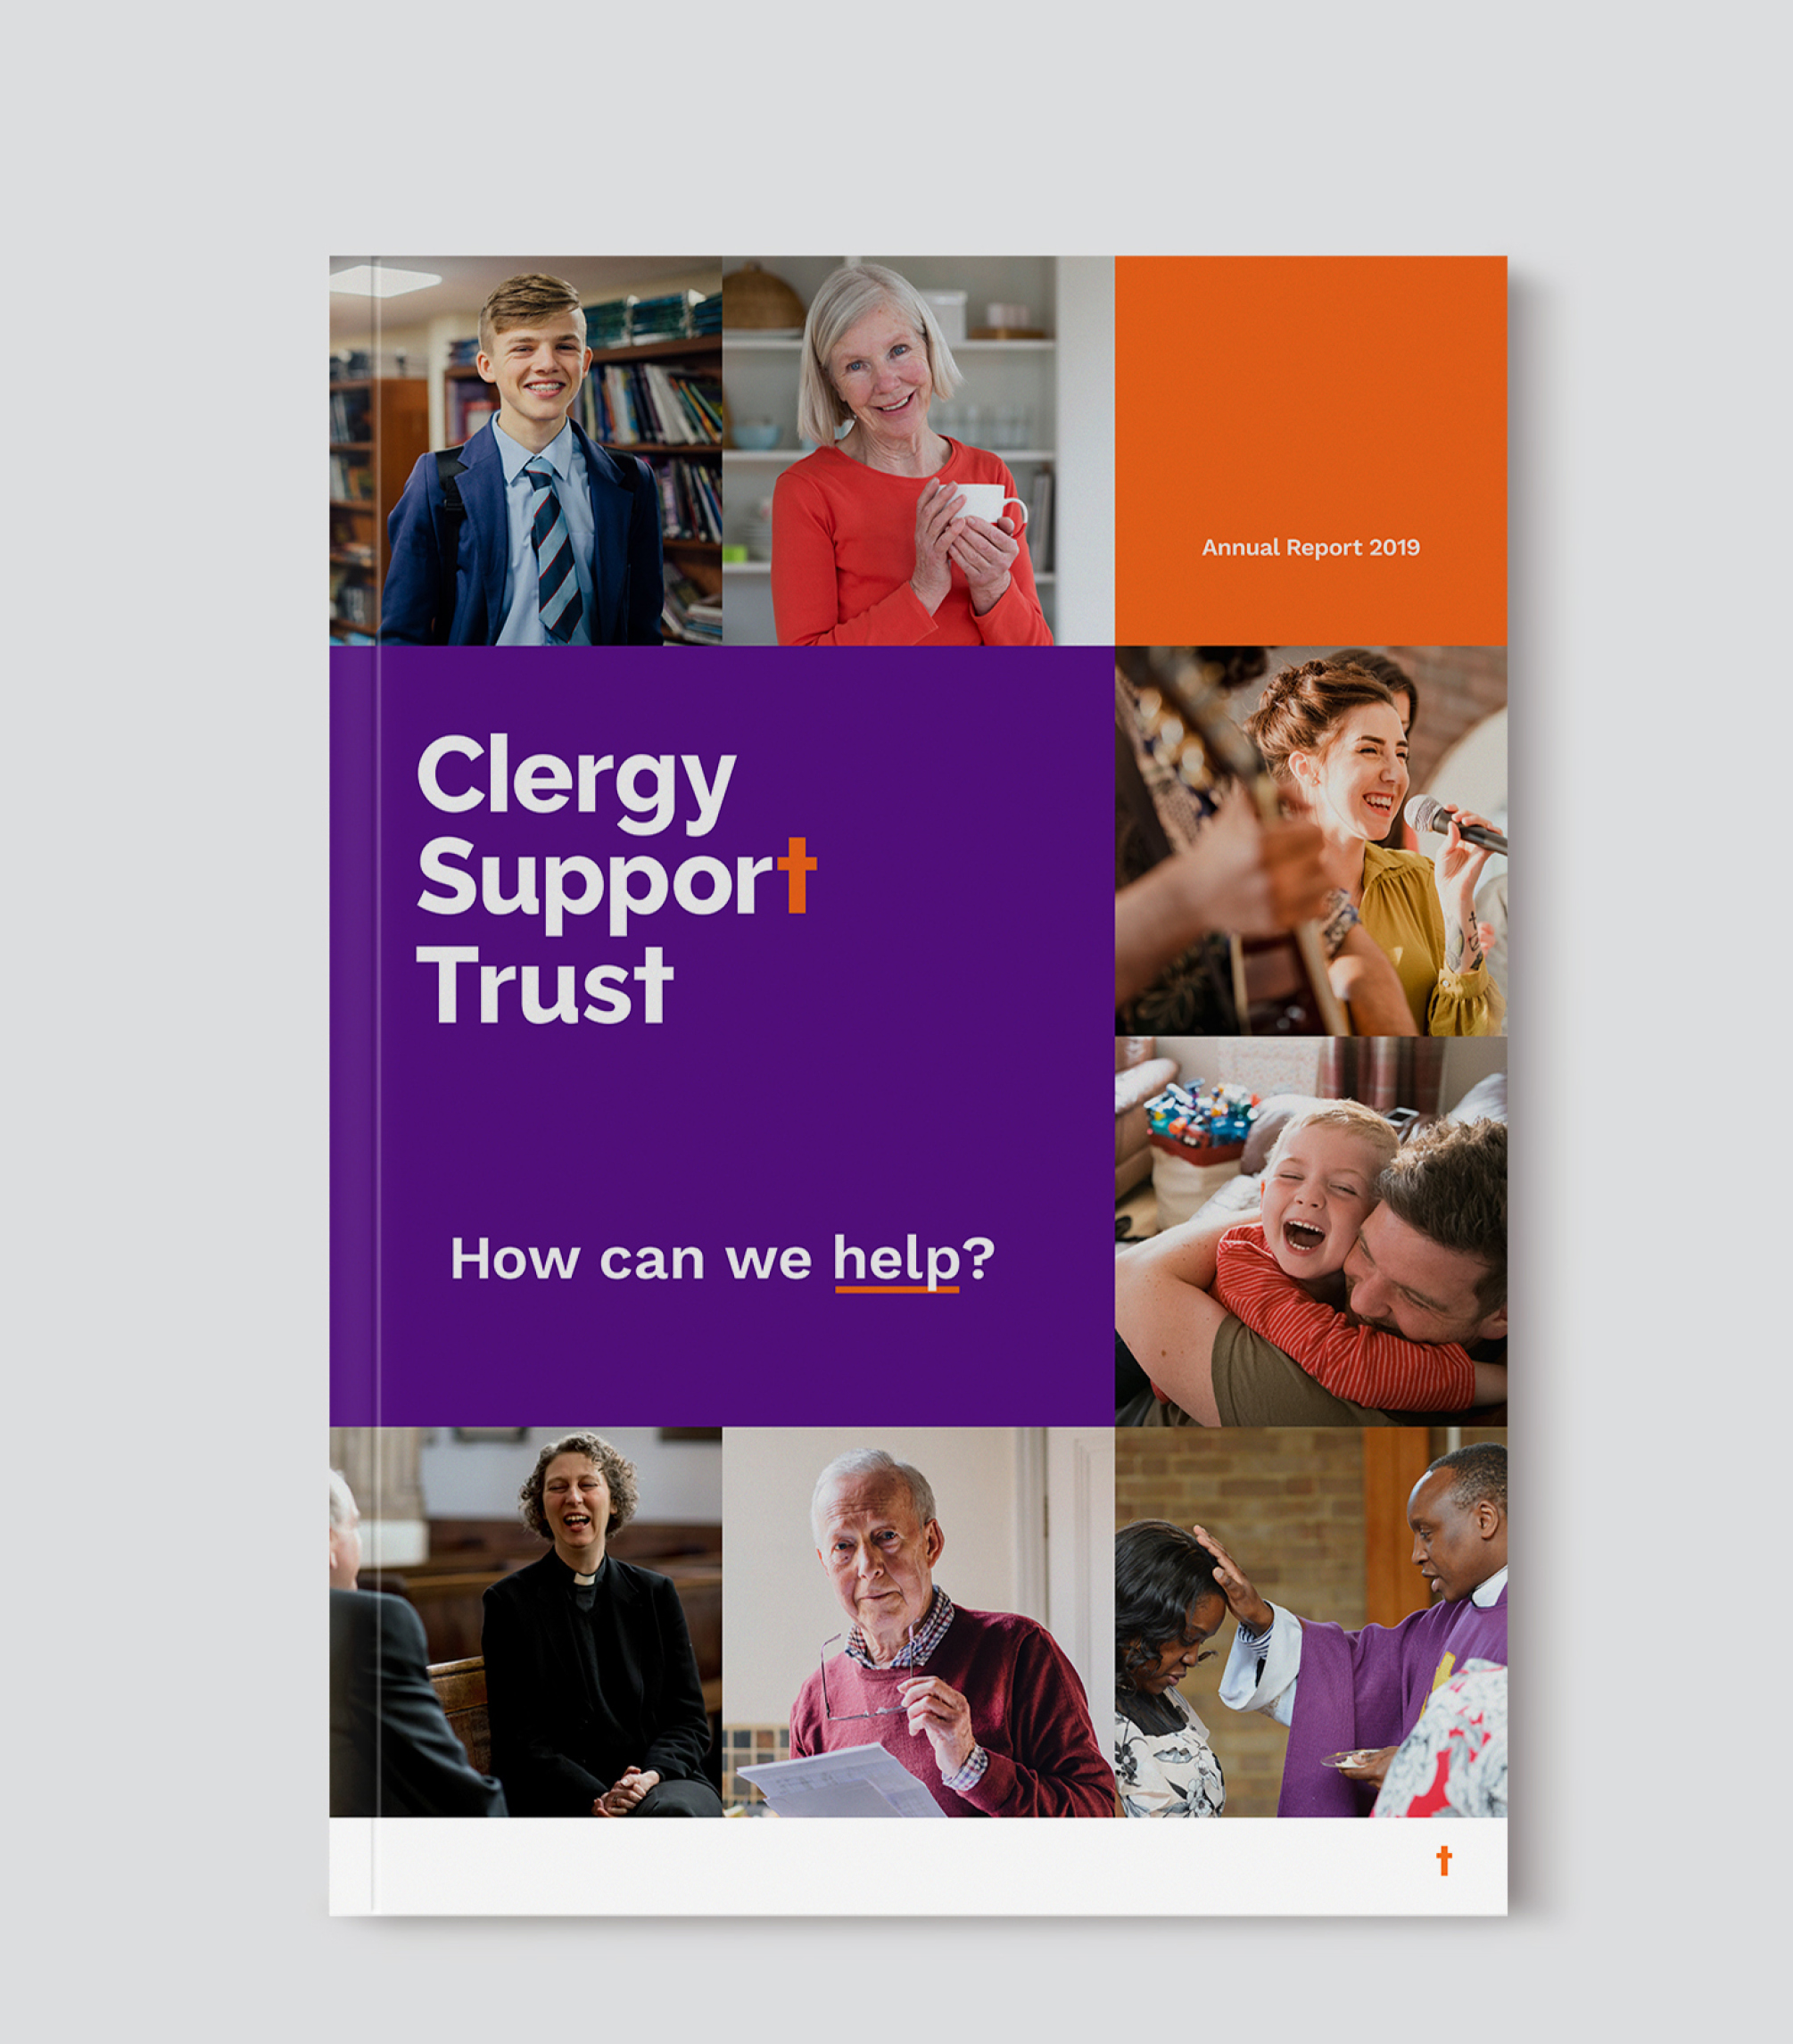 New Clergy Support Trust brand shown on brochure front cover